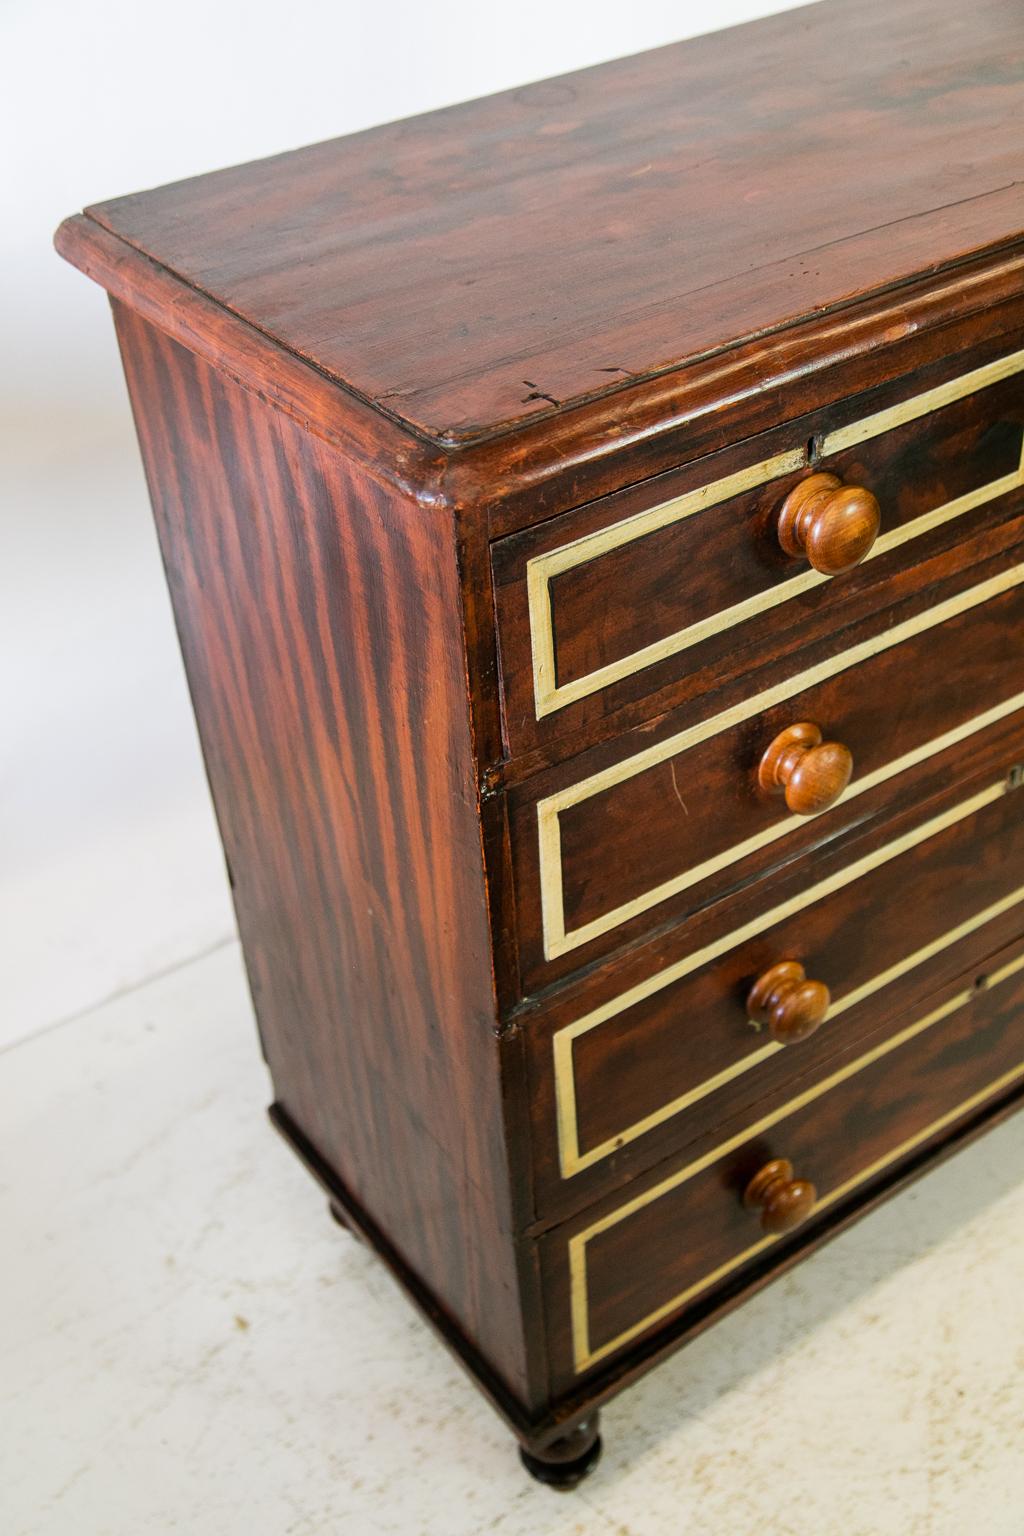 Five-drawer English faux painted chest, is painted to look like wood grain with light bindings on the drawer fronts. The sycamore knobs and bun feet are original.